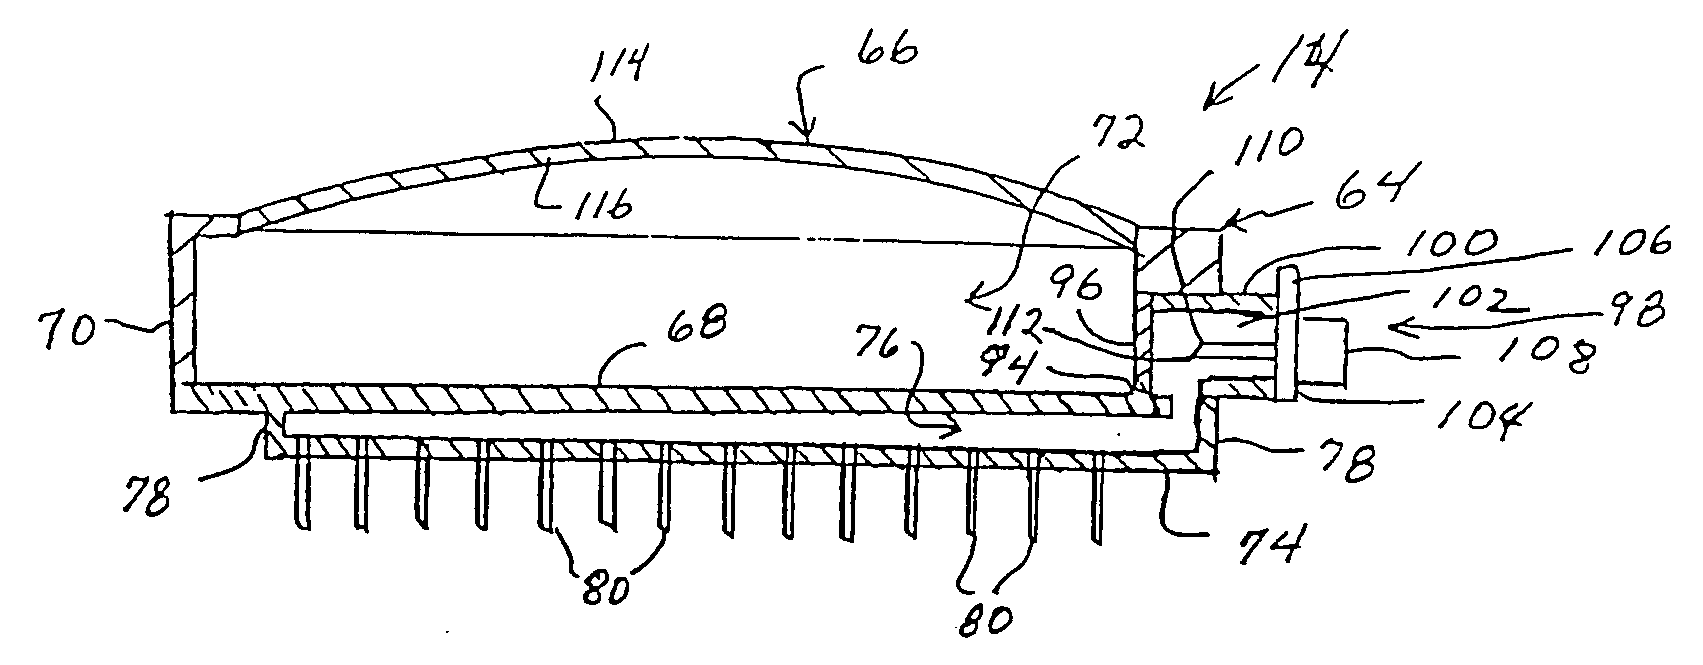 Intradermal delivery device